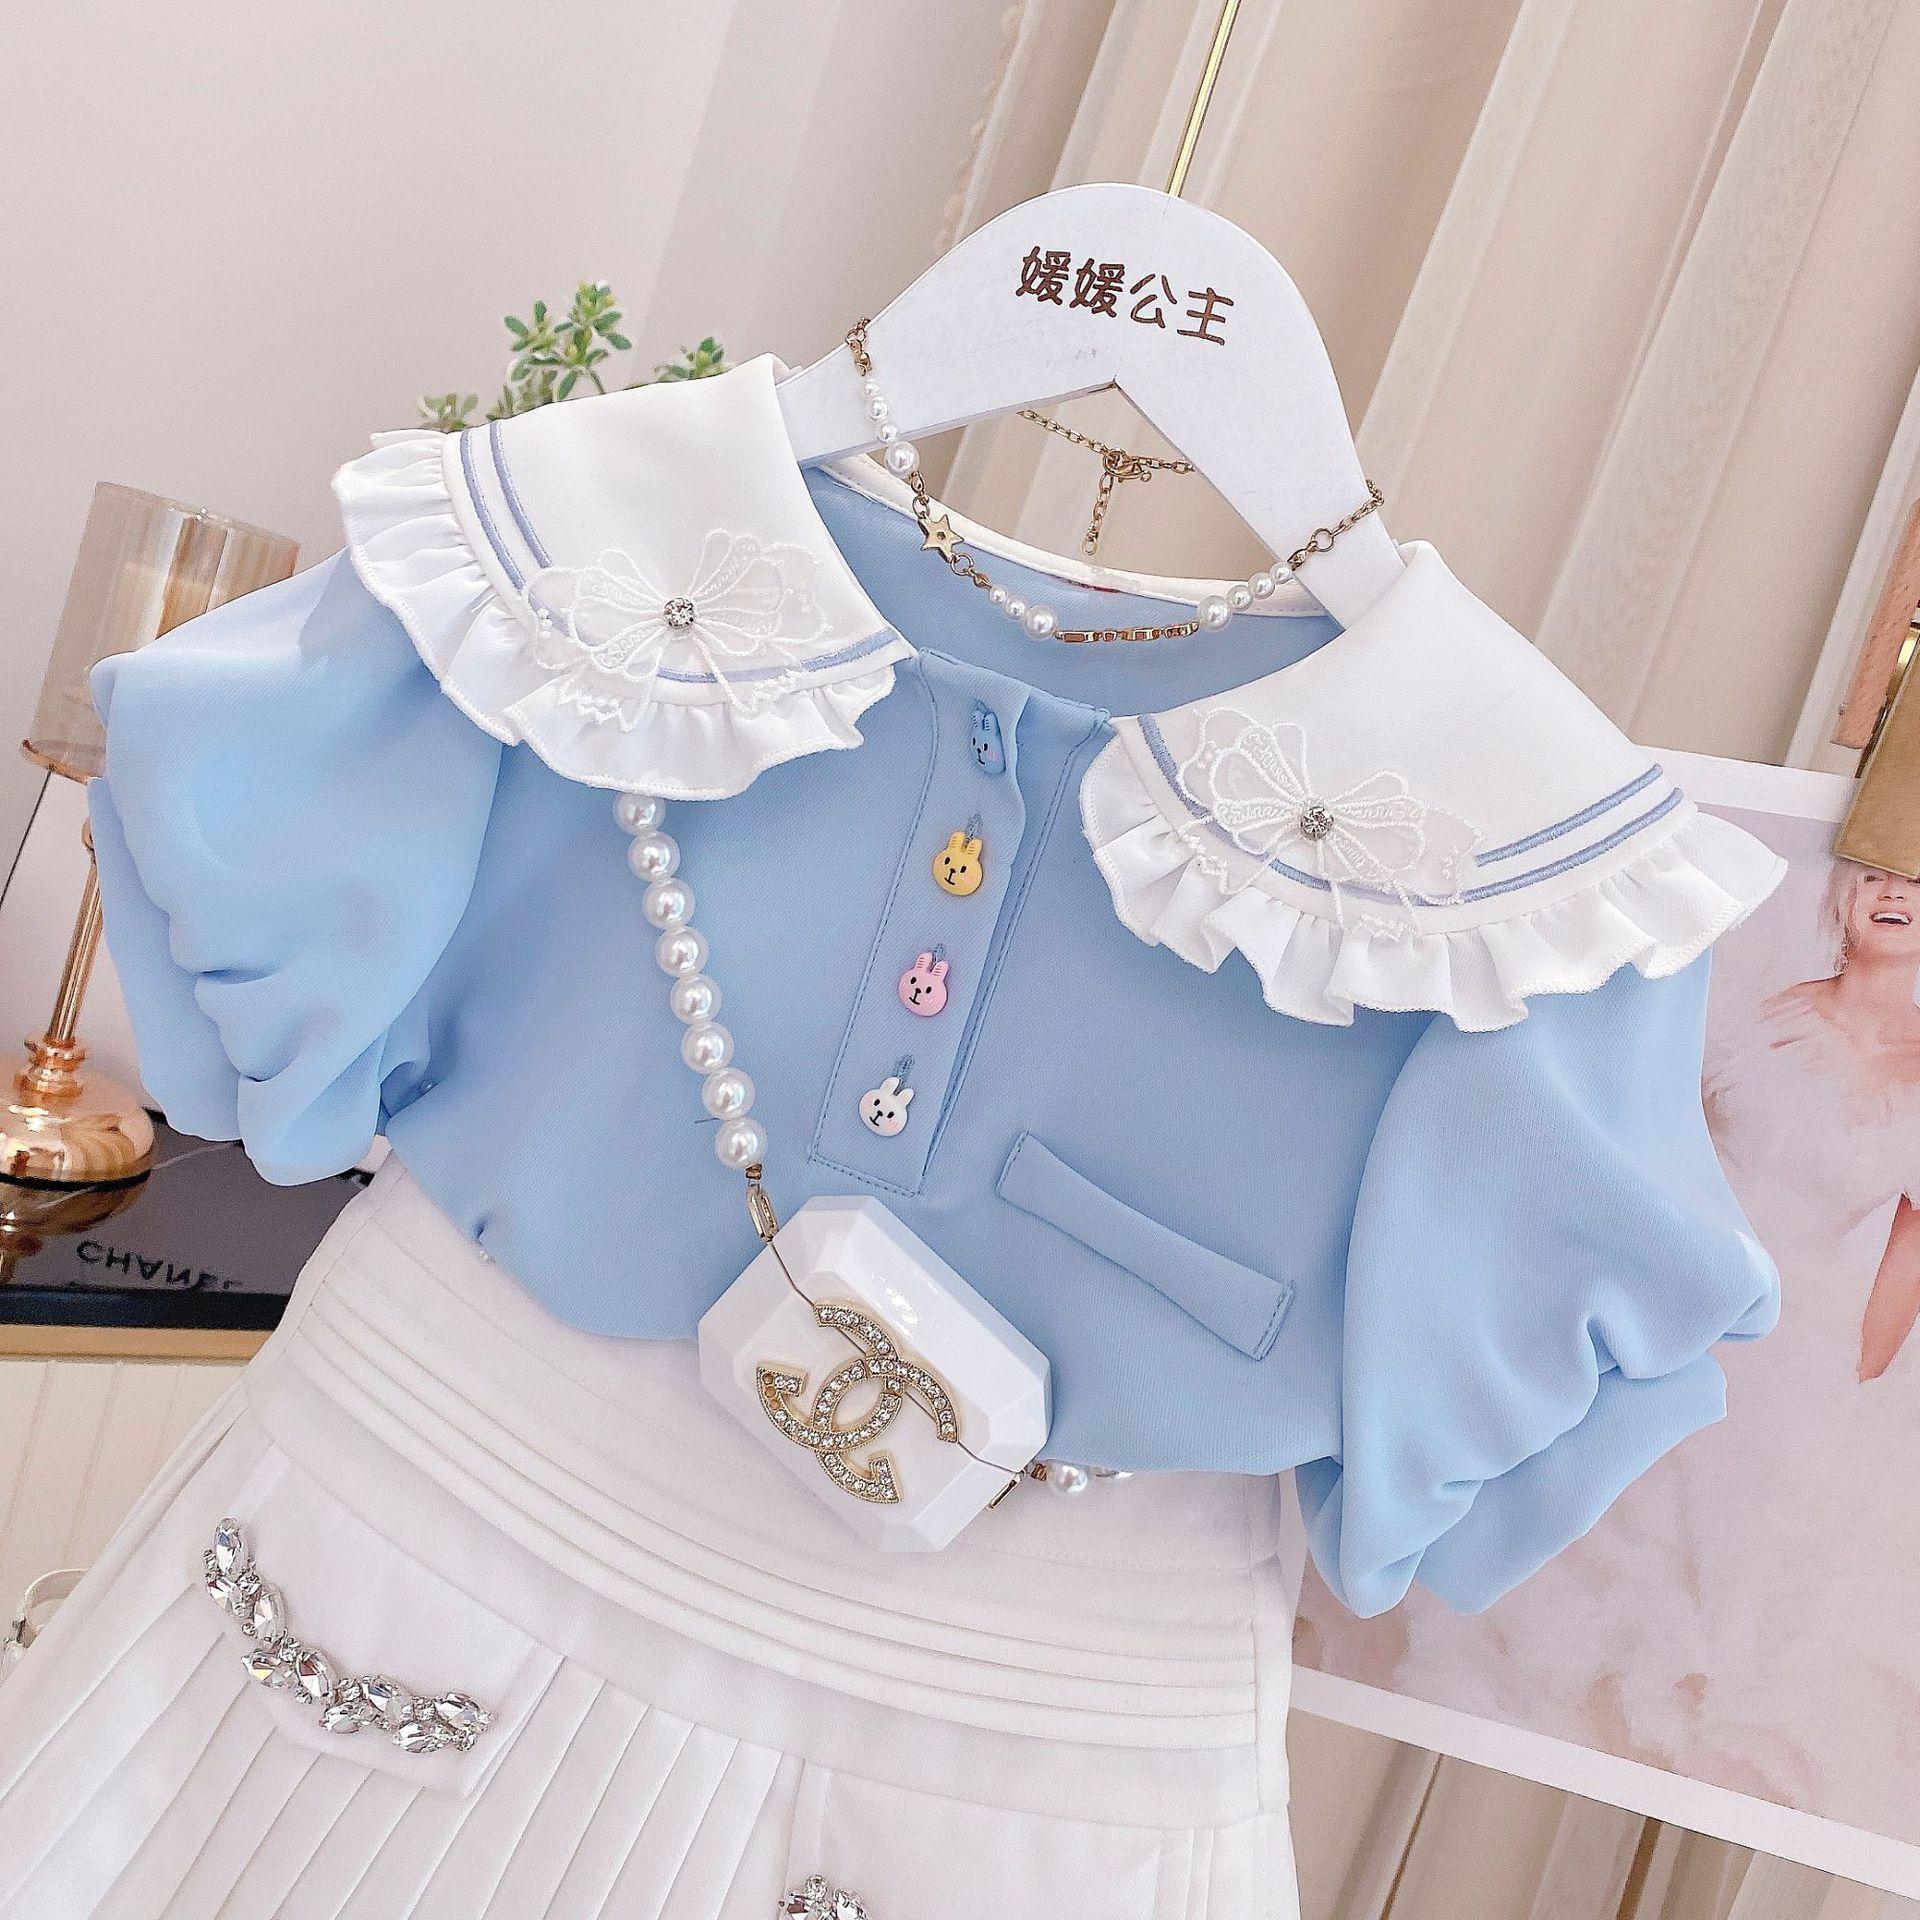 Girls' suit summer 2022 new Korean style foreign style children's two-piece suit girl short-sleeved lapel shirt skirt pants